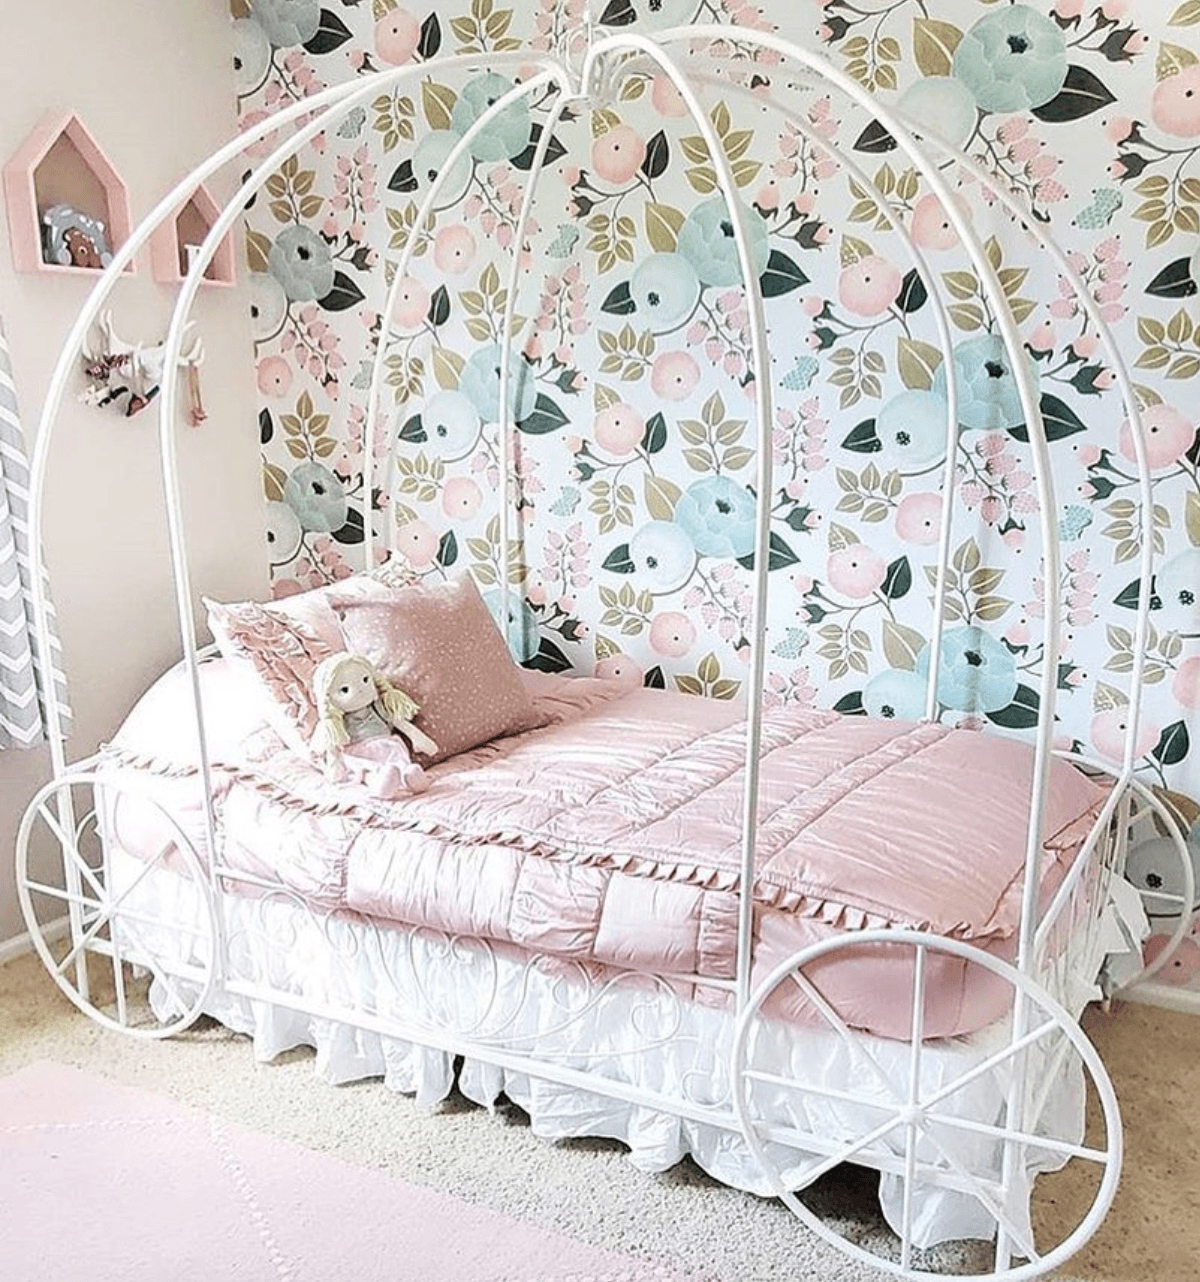 Big girl room with carriage bed - fit for a little princess